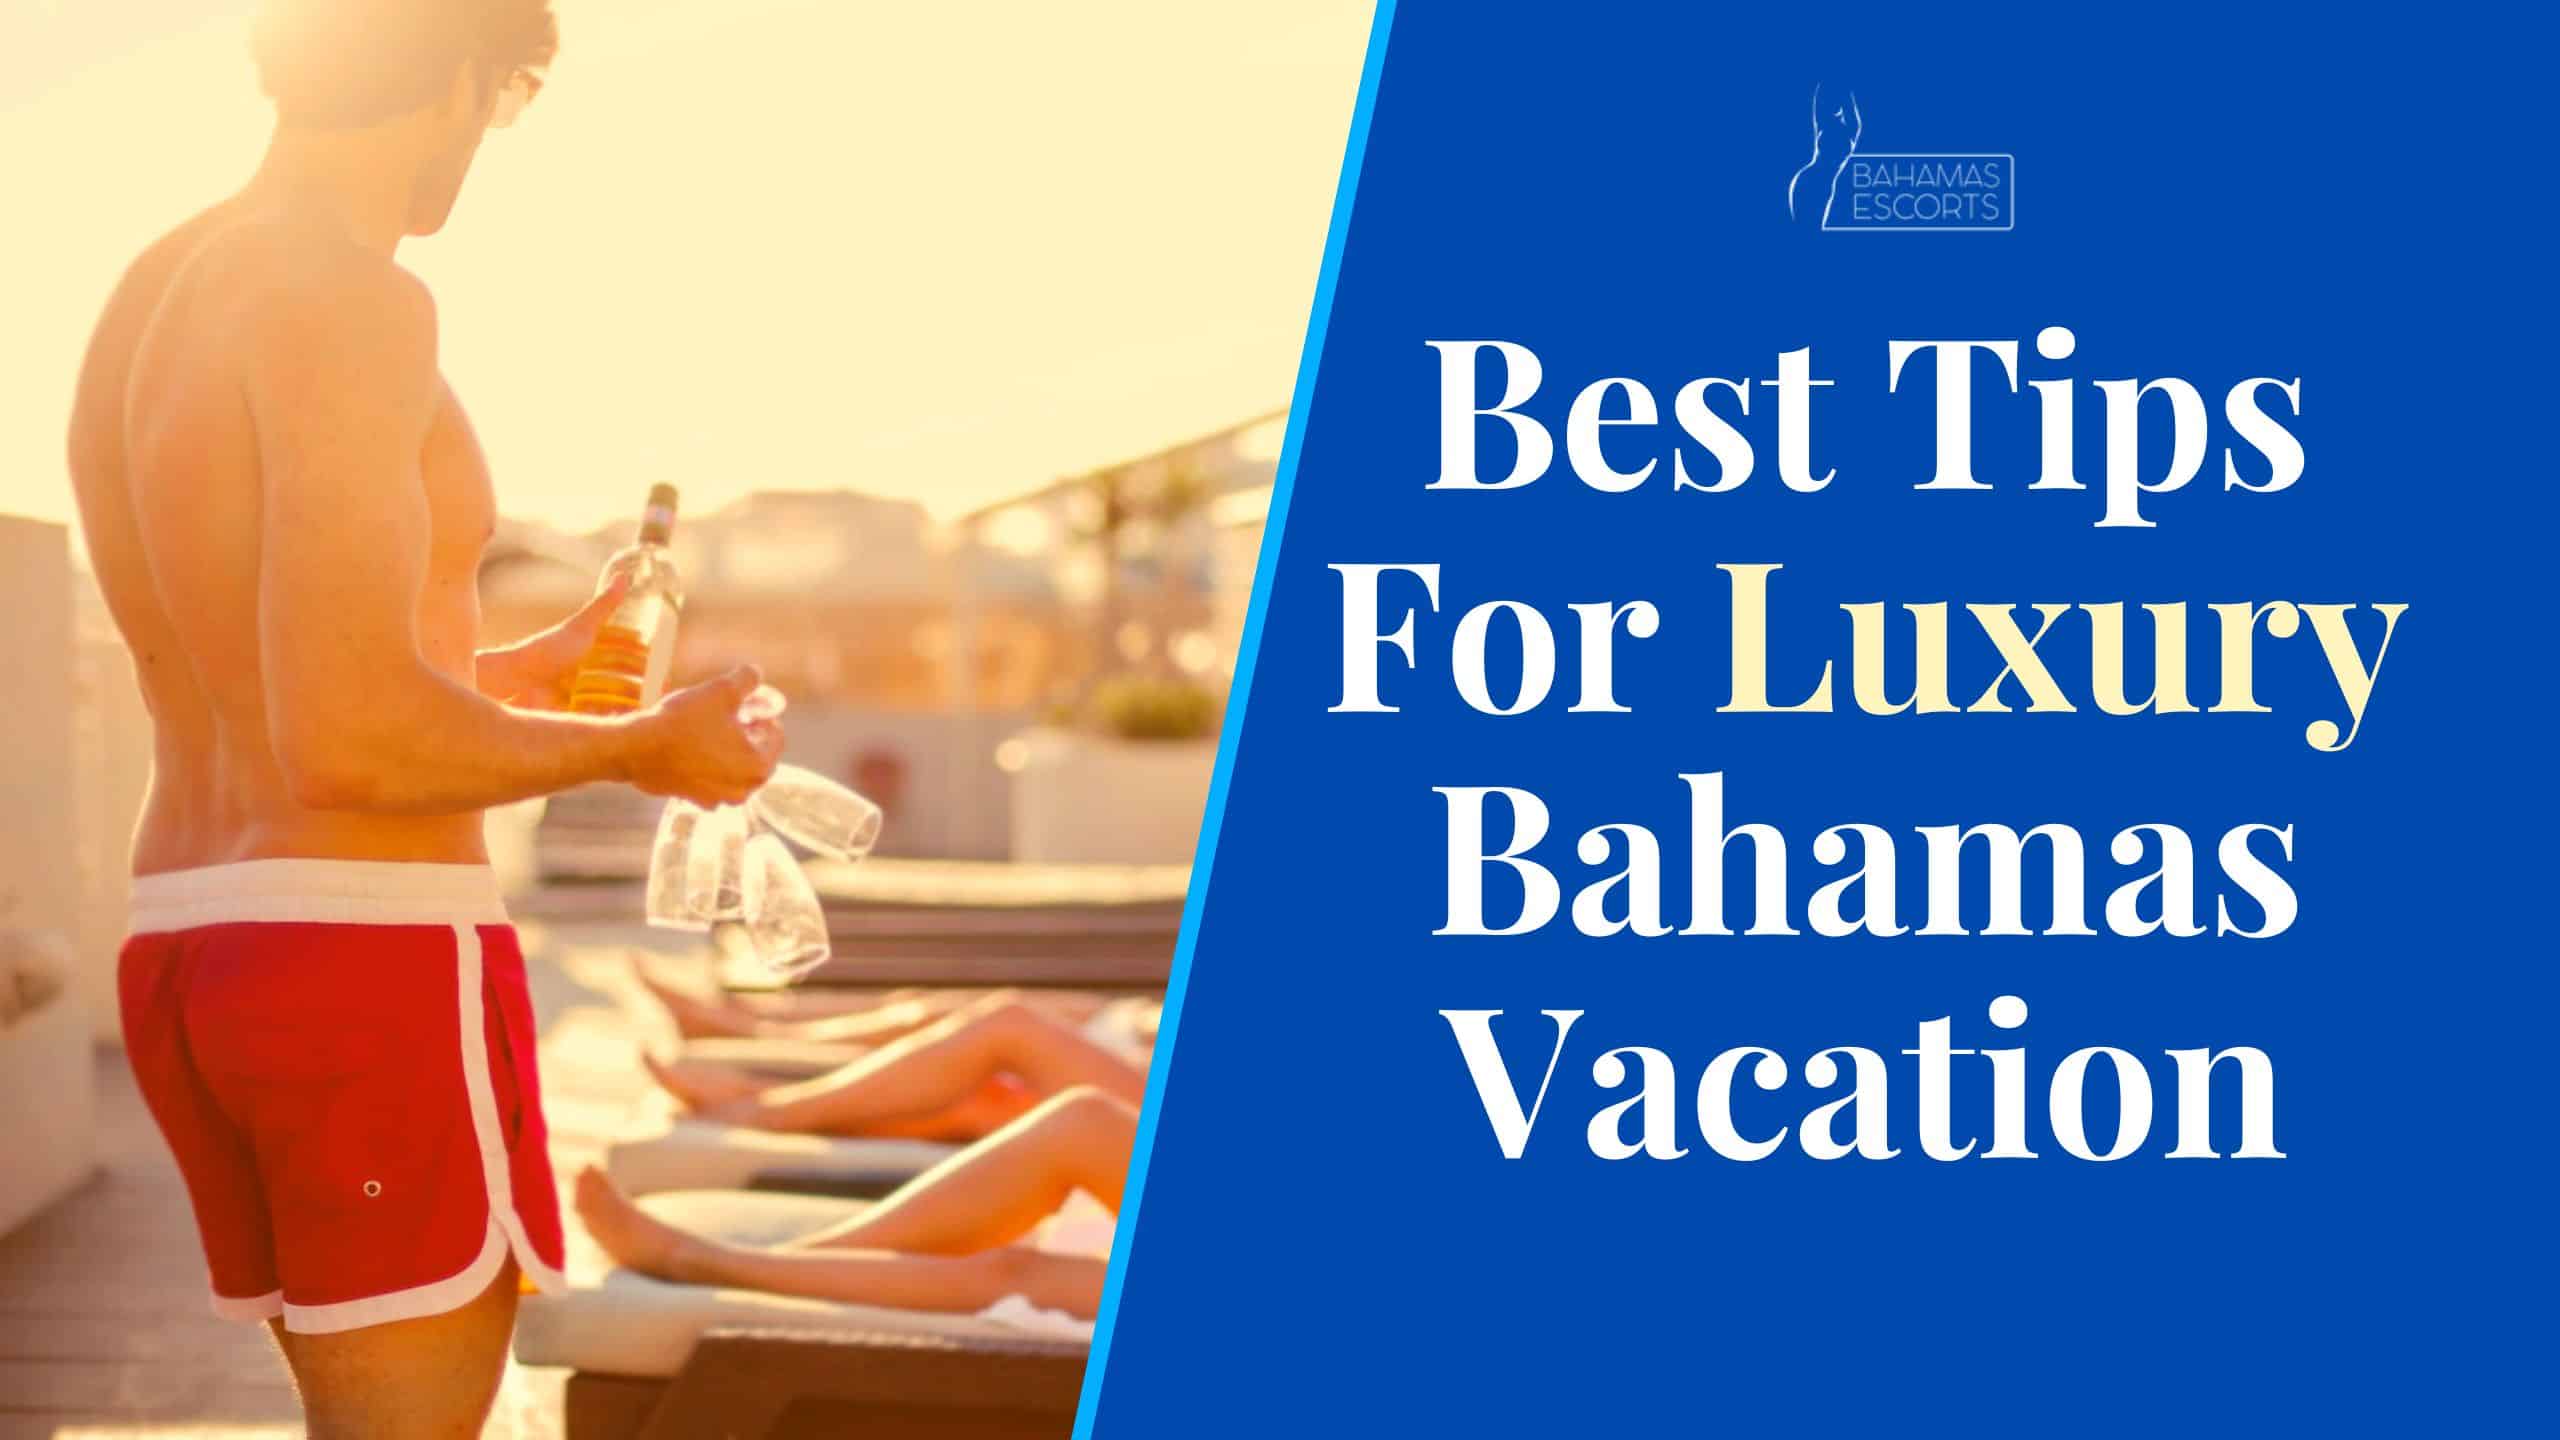 How to Plan a Luxurious Vacation in the Bahamas?